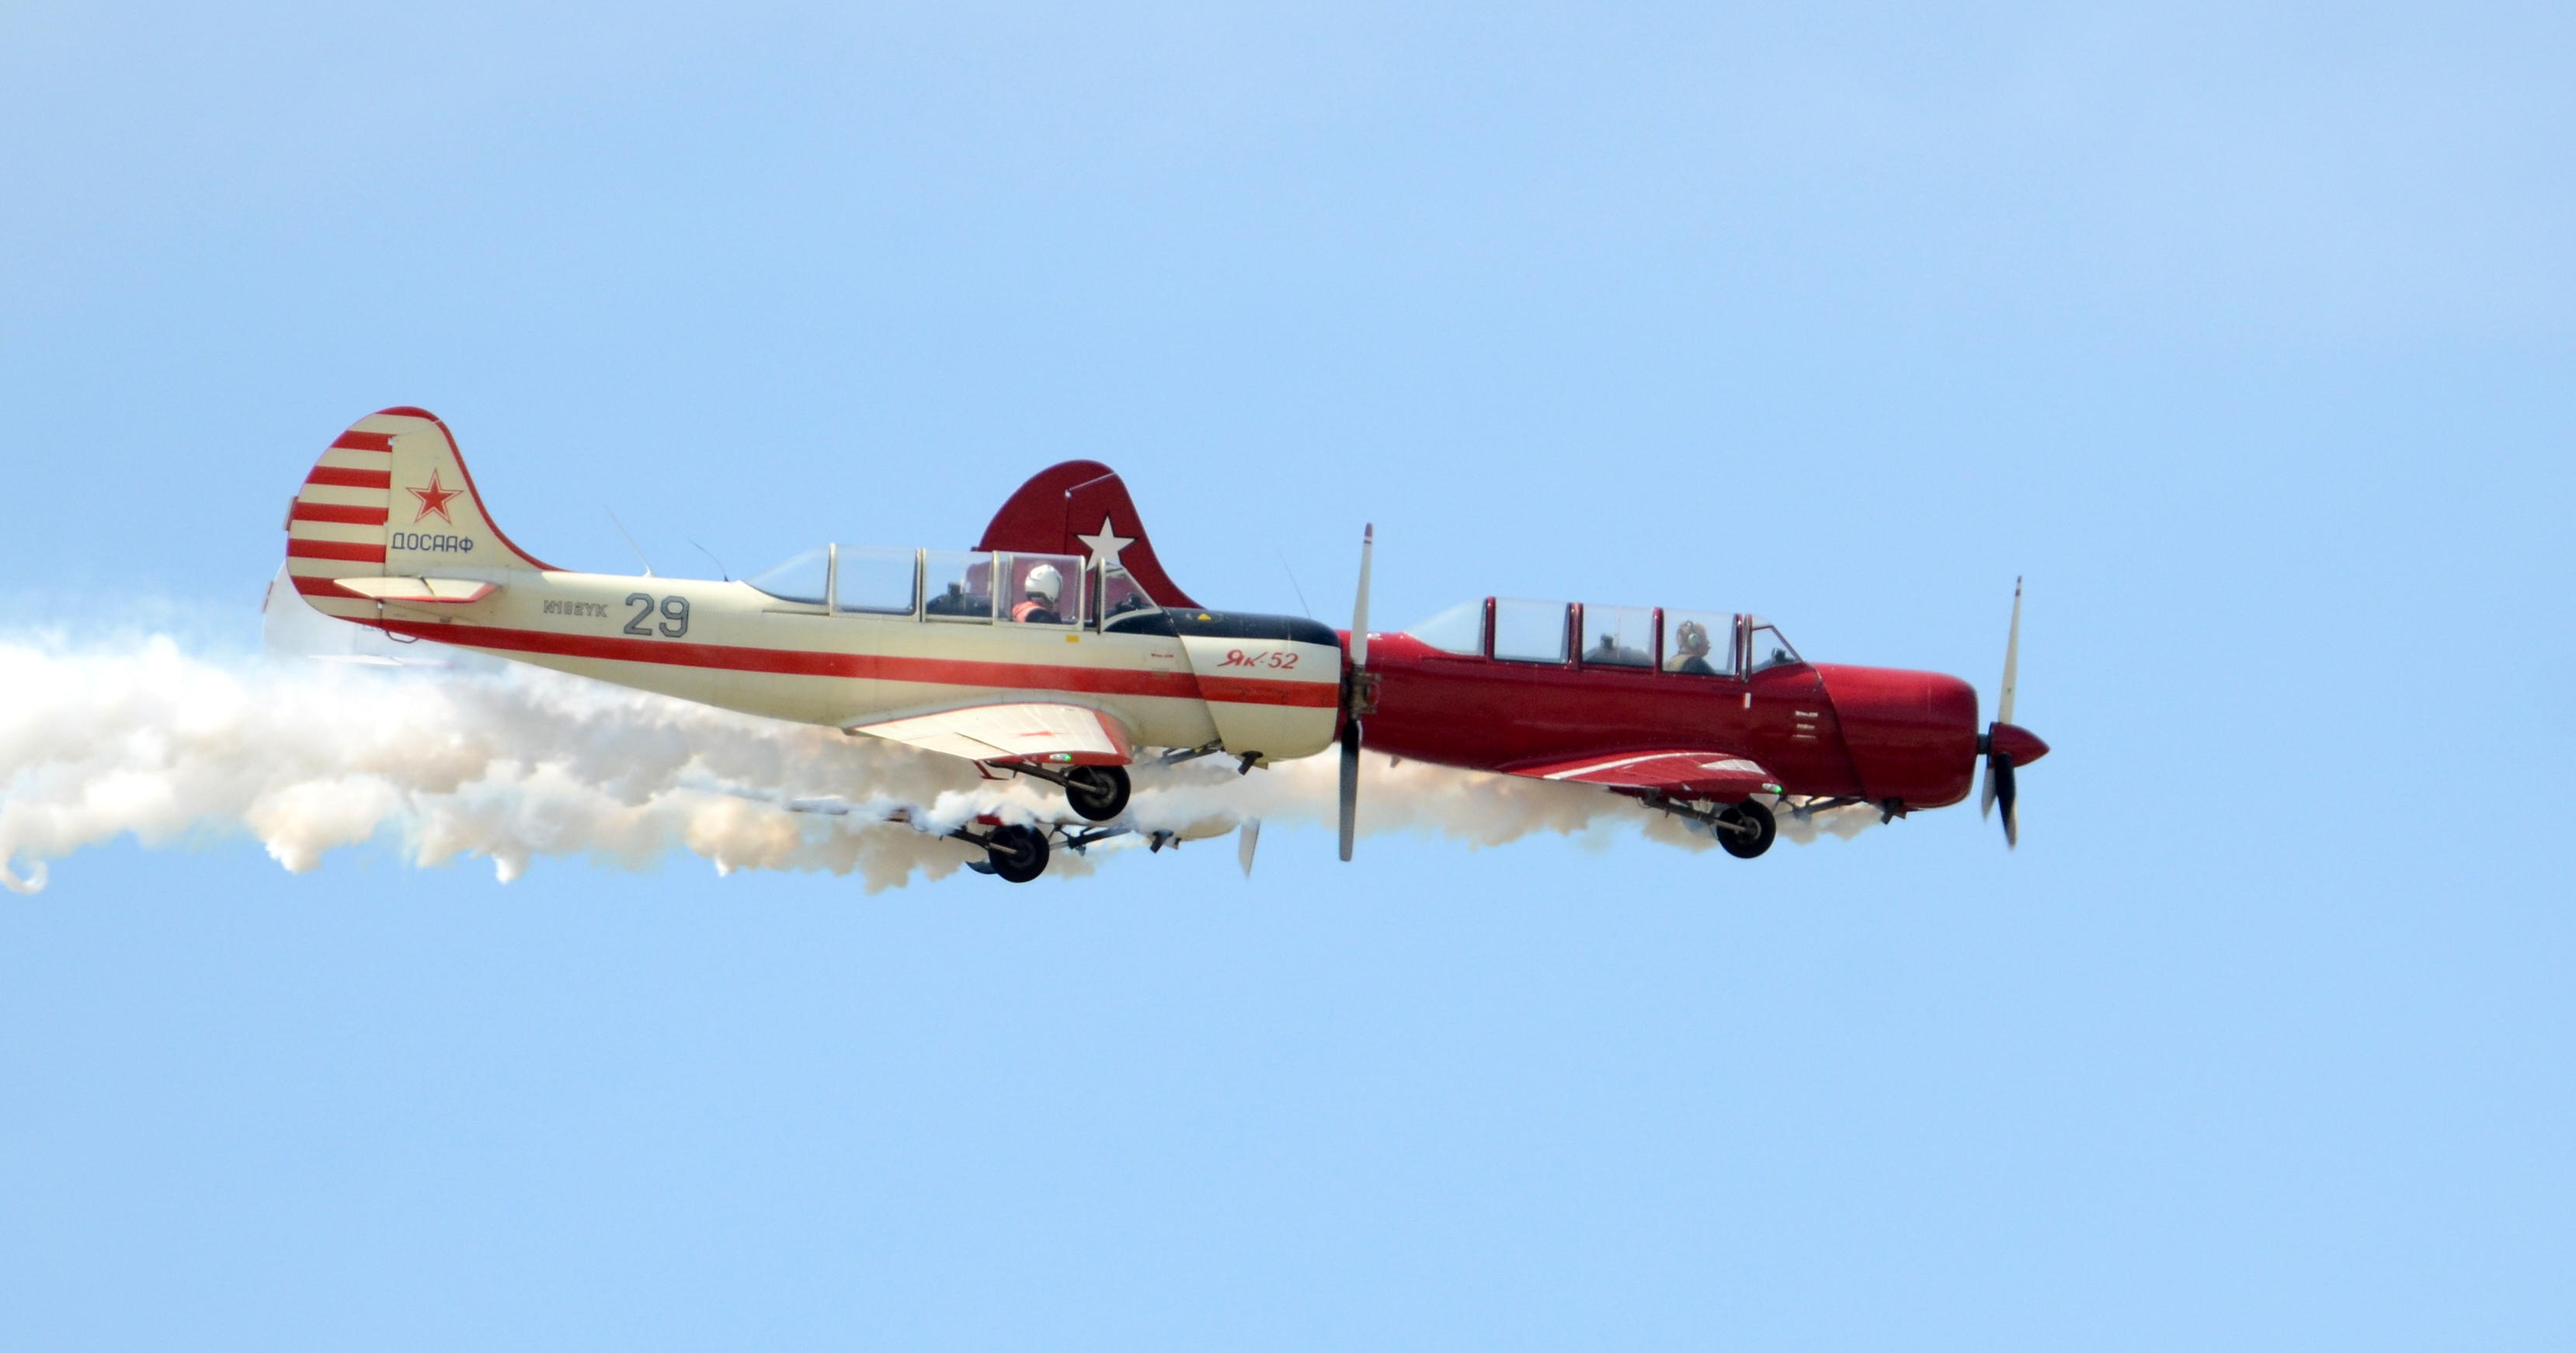 The Great St. of Maine Airshow  -  Northeast Raiders